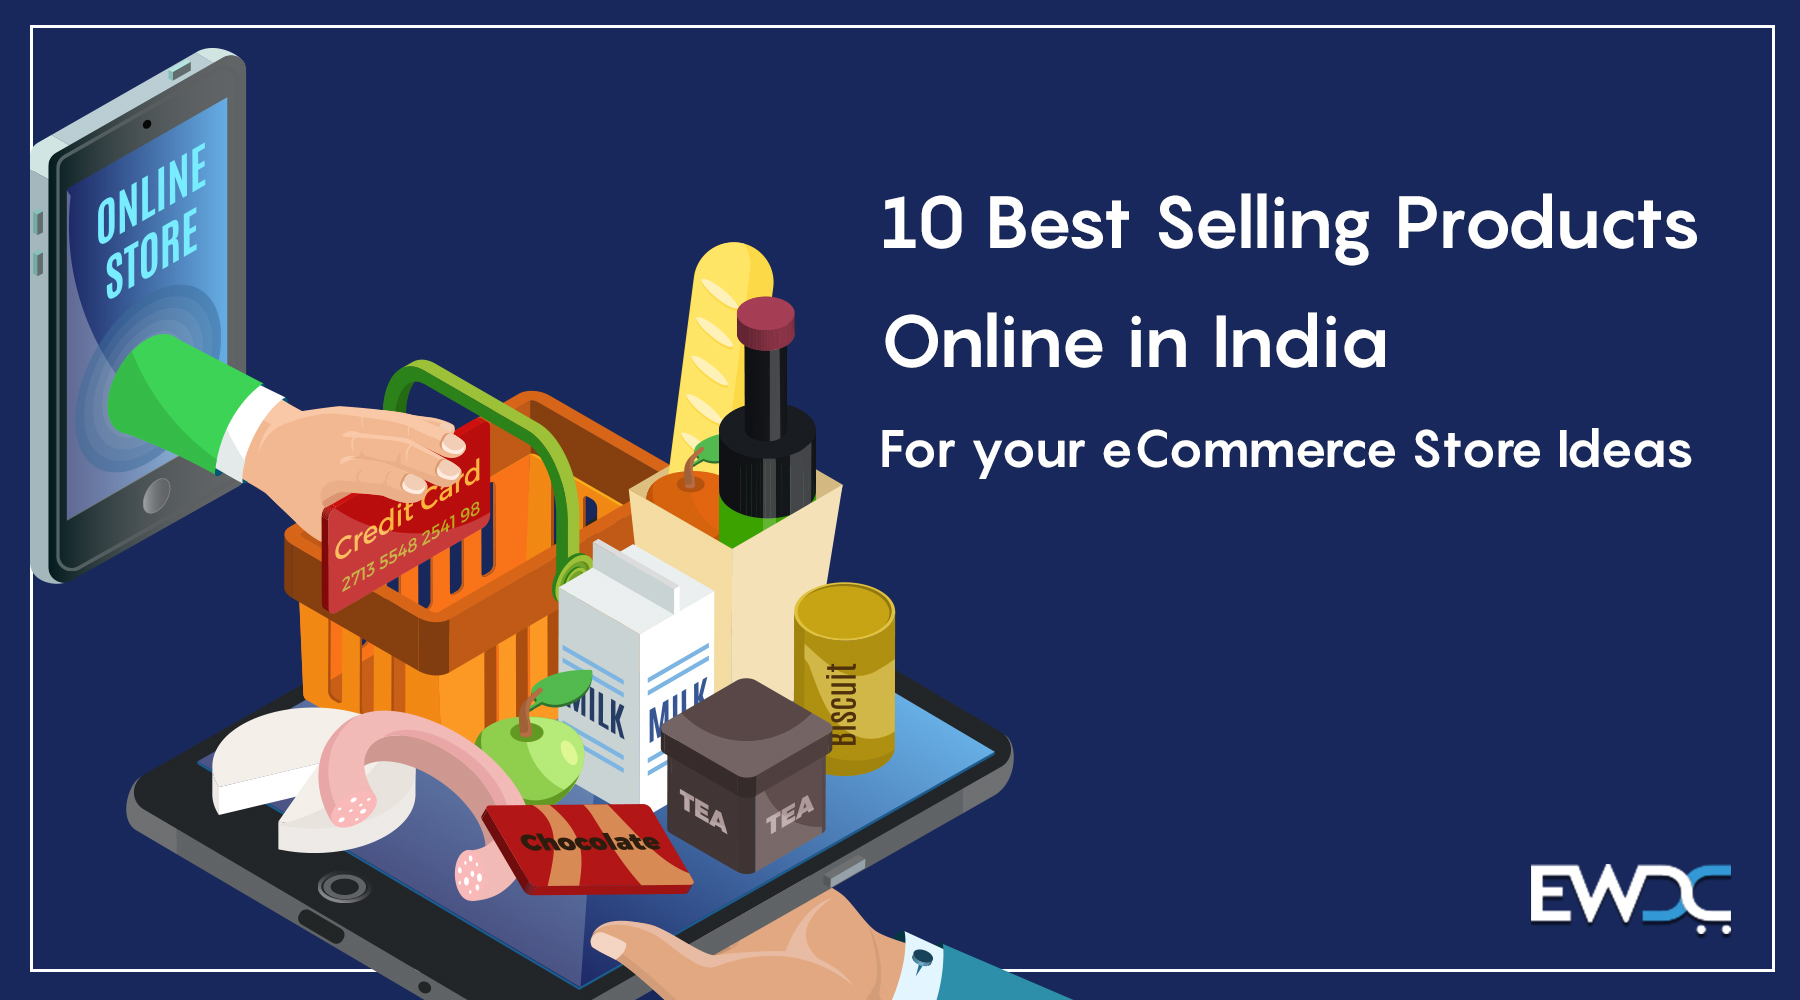 Buy Products Online at Best Price in India - All Categories